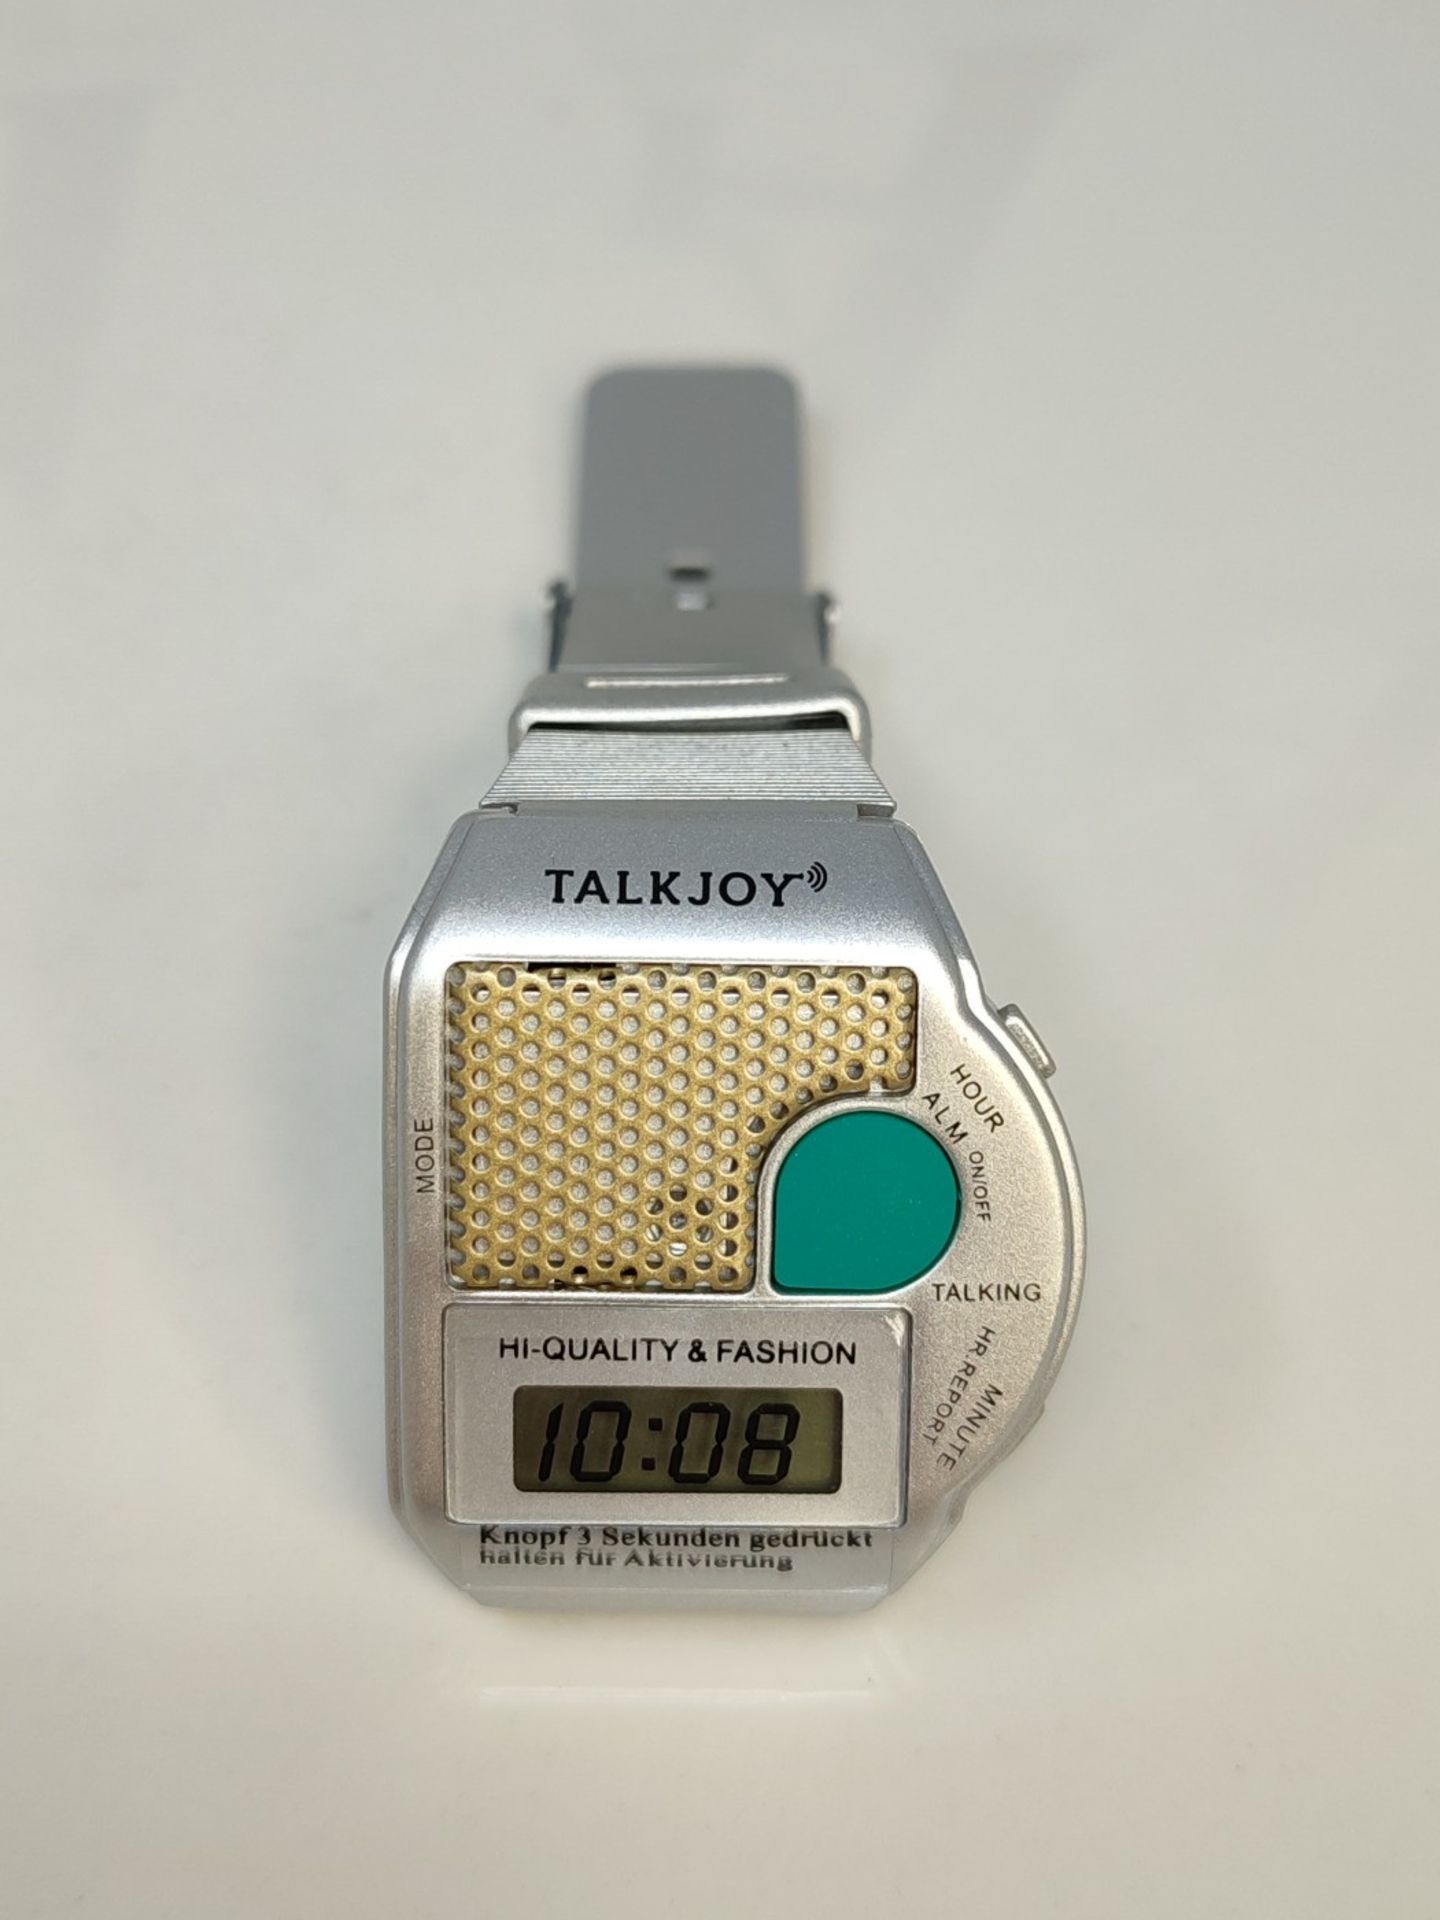 TalkJoy Talking Bracelet Watch Silver Watch Alarm Announcement Time at the Push of a B